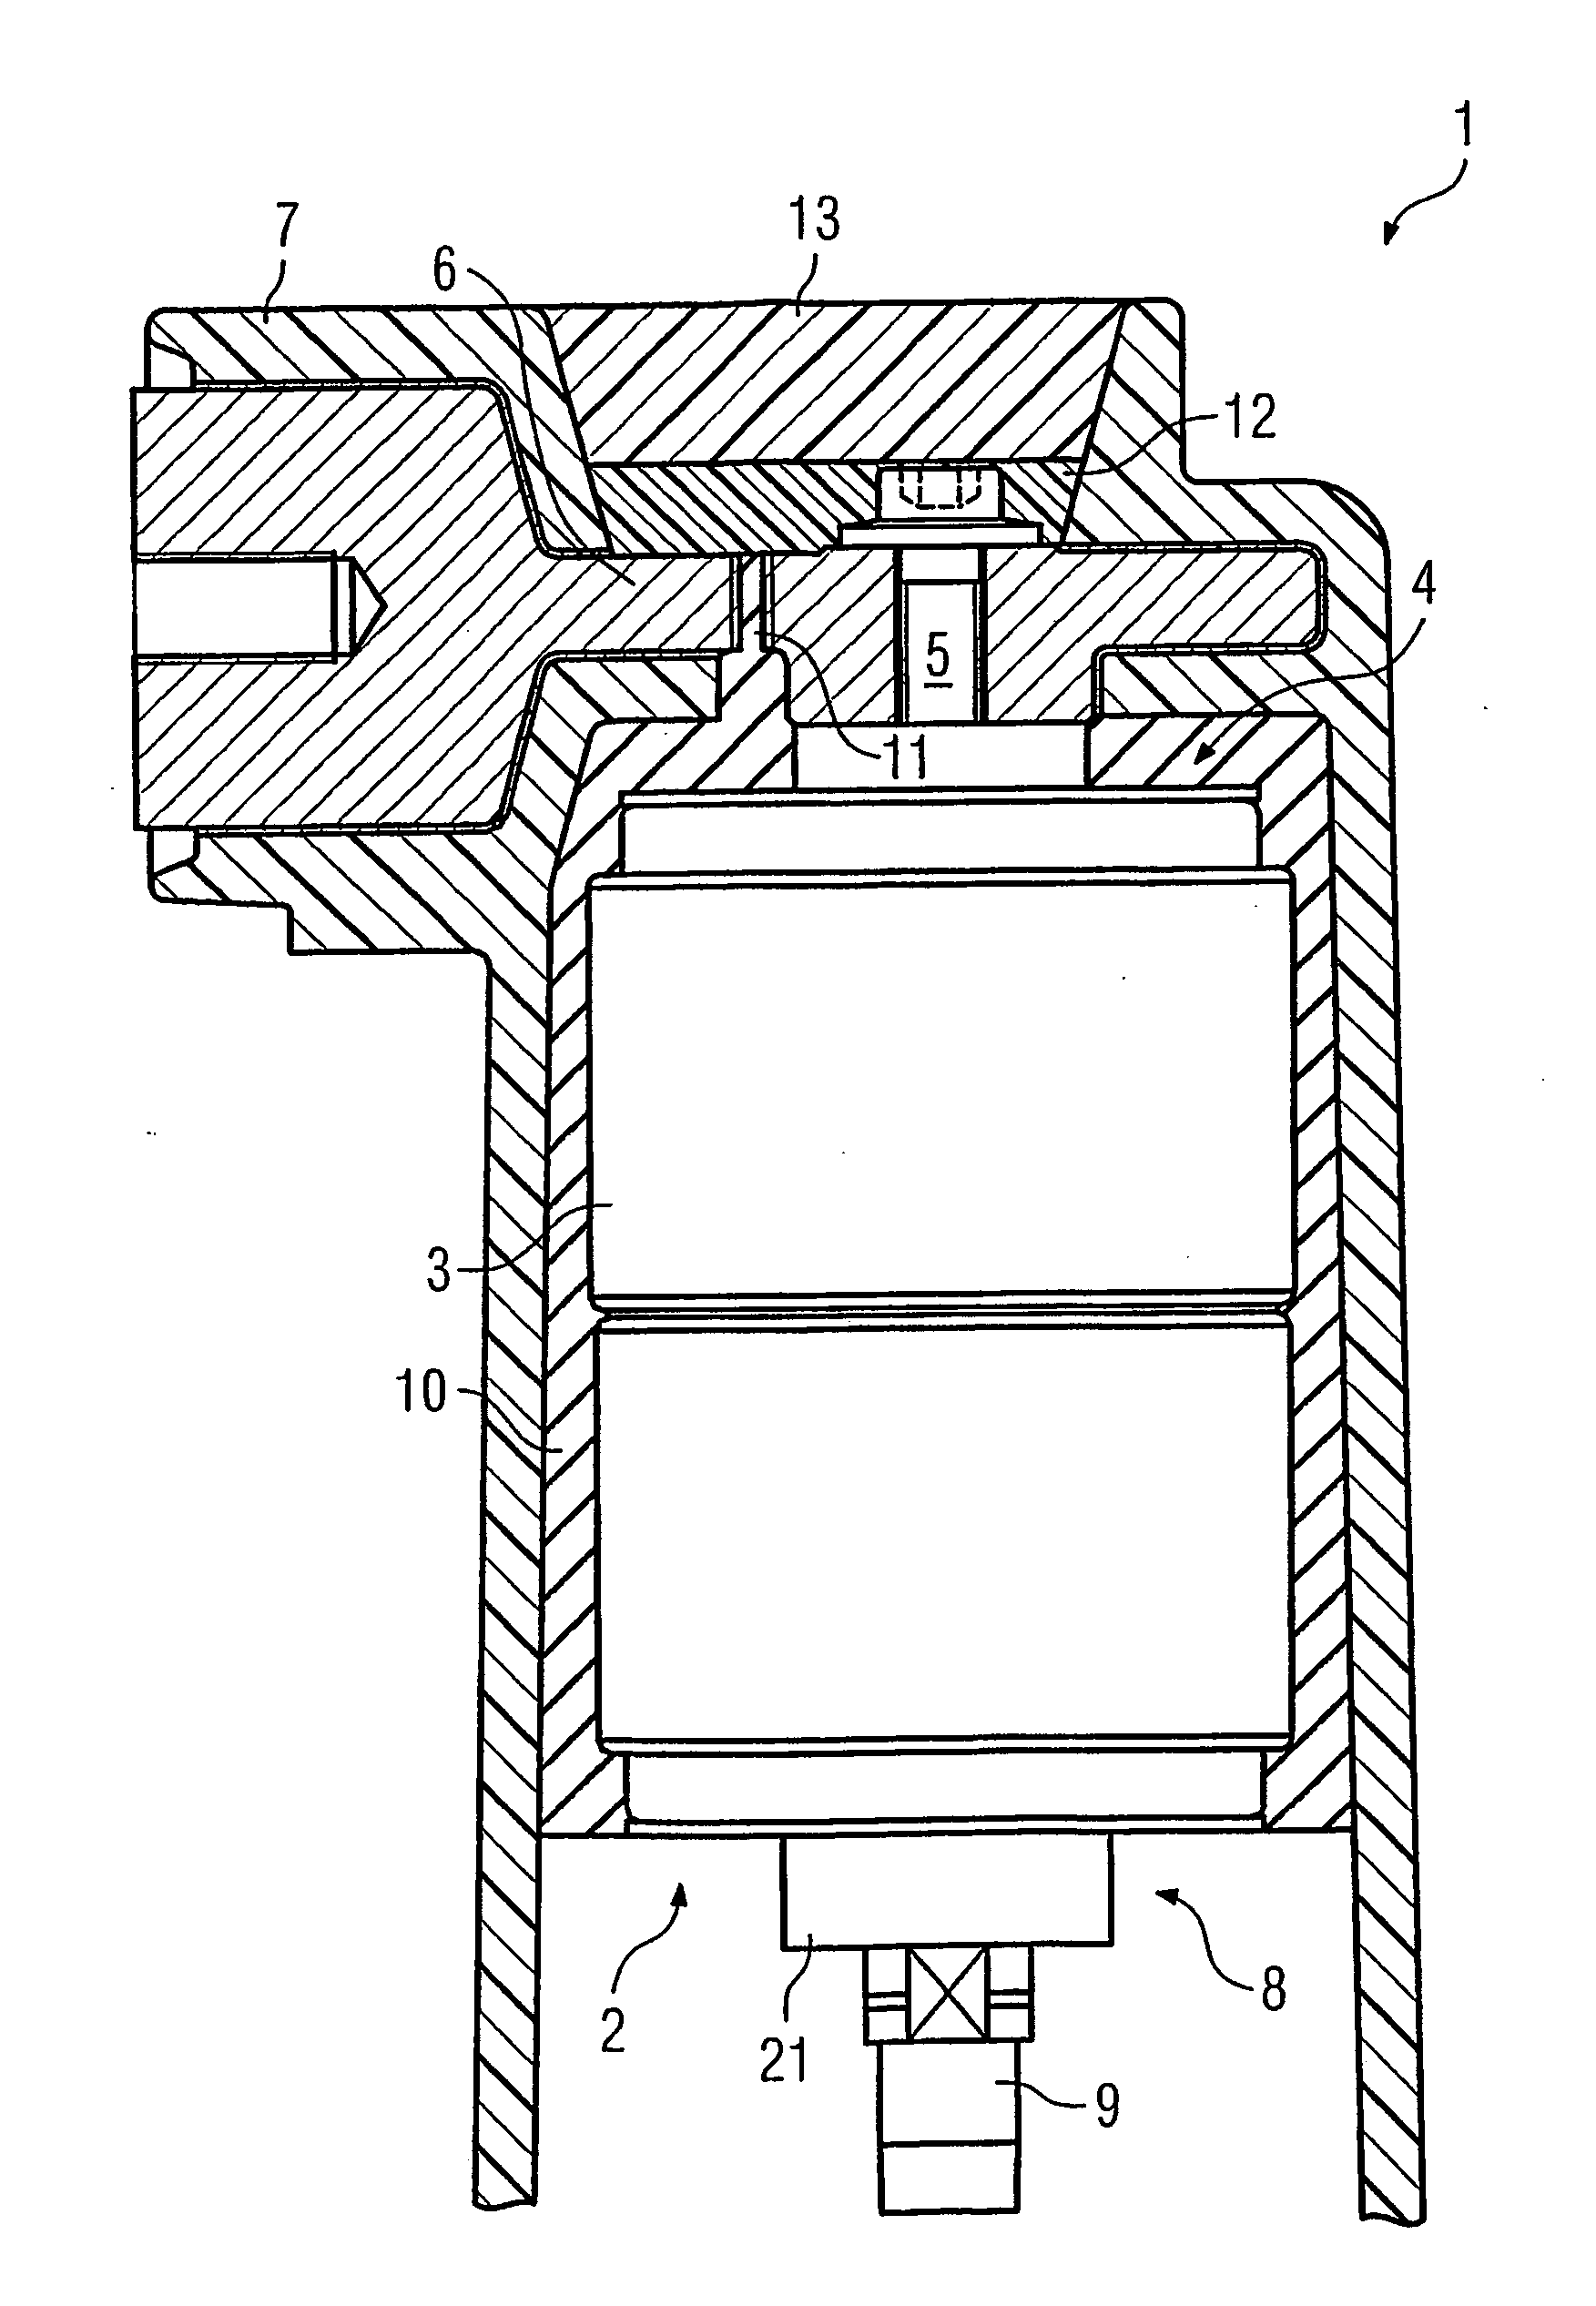 Production of a circuit-breaker pole, insulated by a solid material